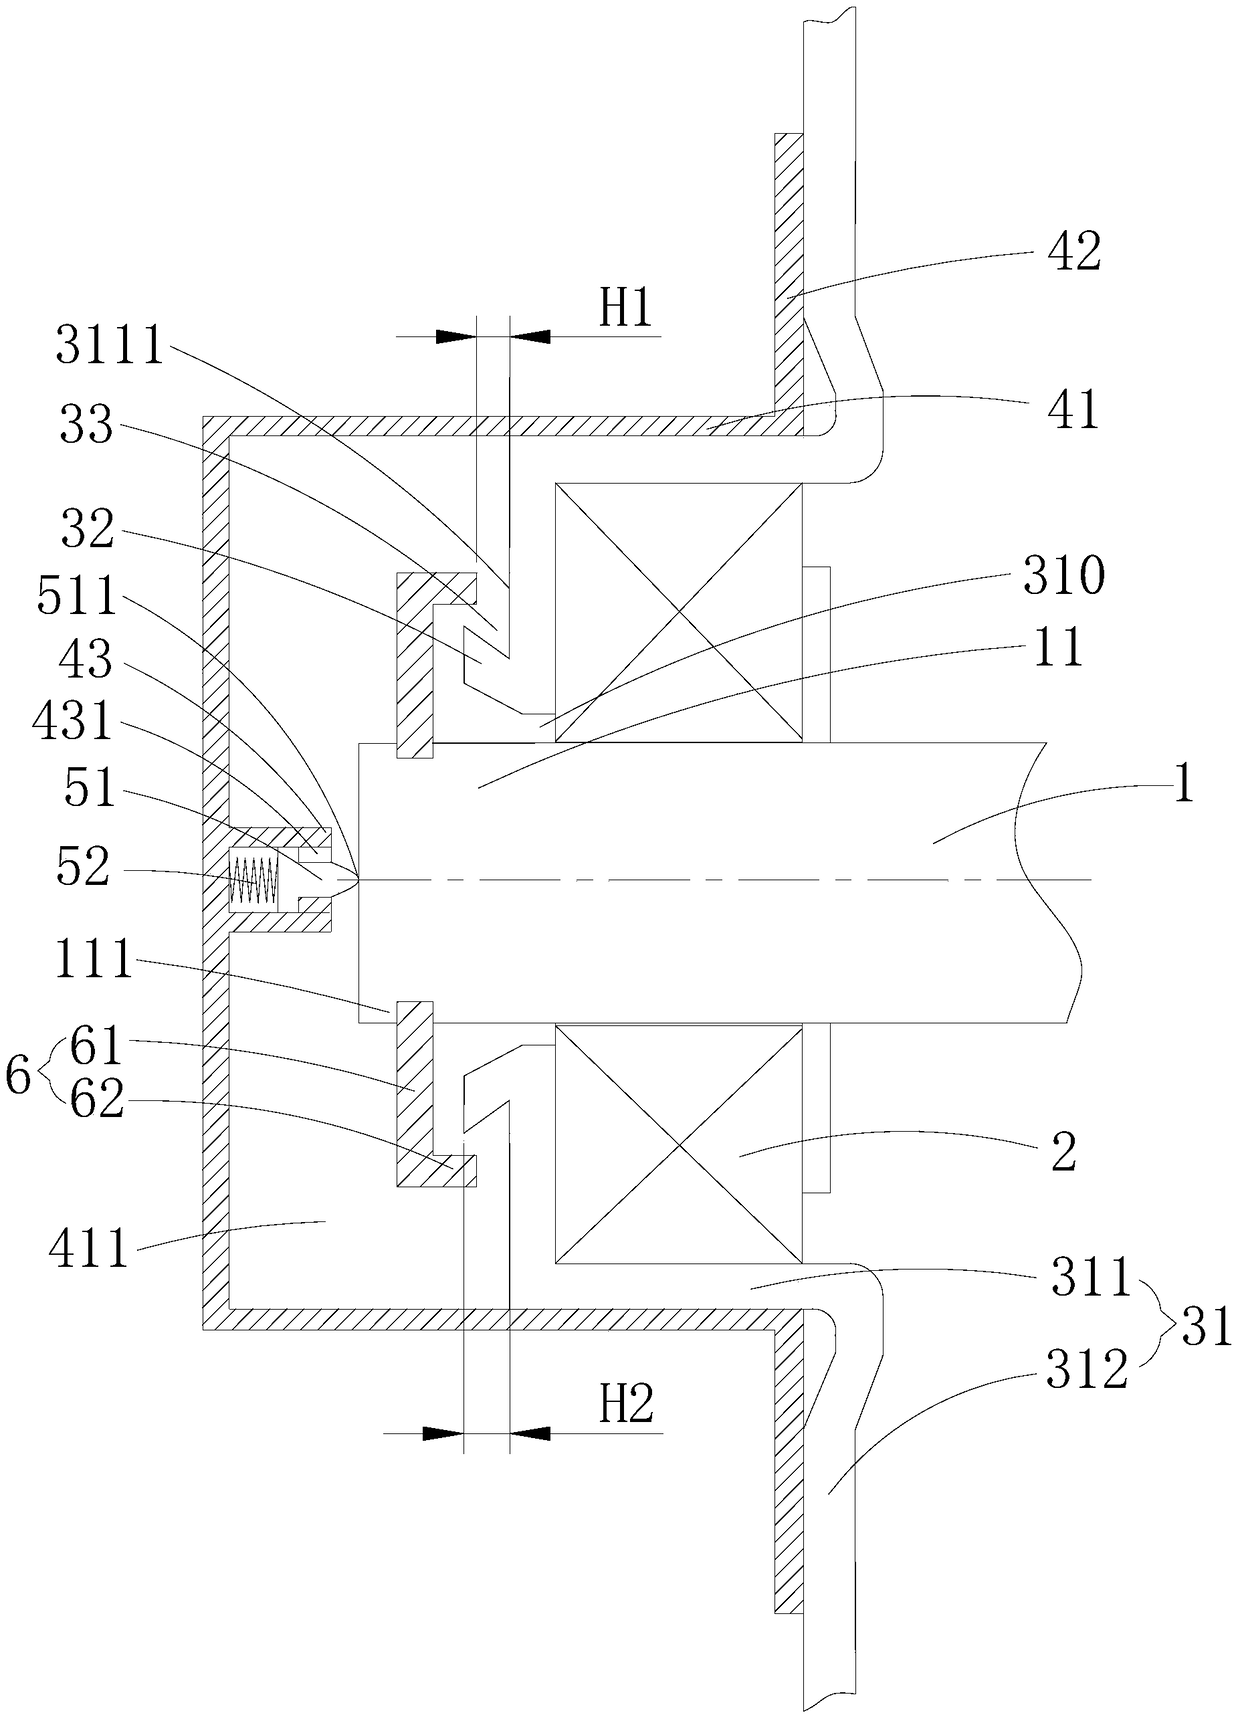 Anti-corrosion structure of motor bearing and plastic-encapsulated brushless DC motor